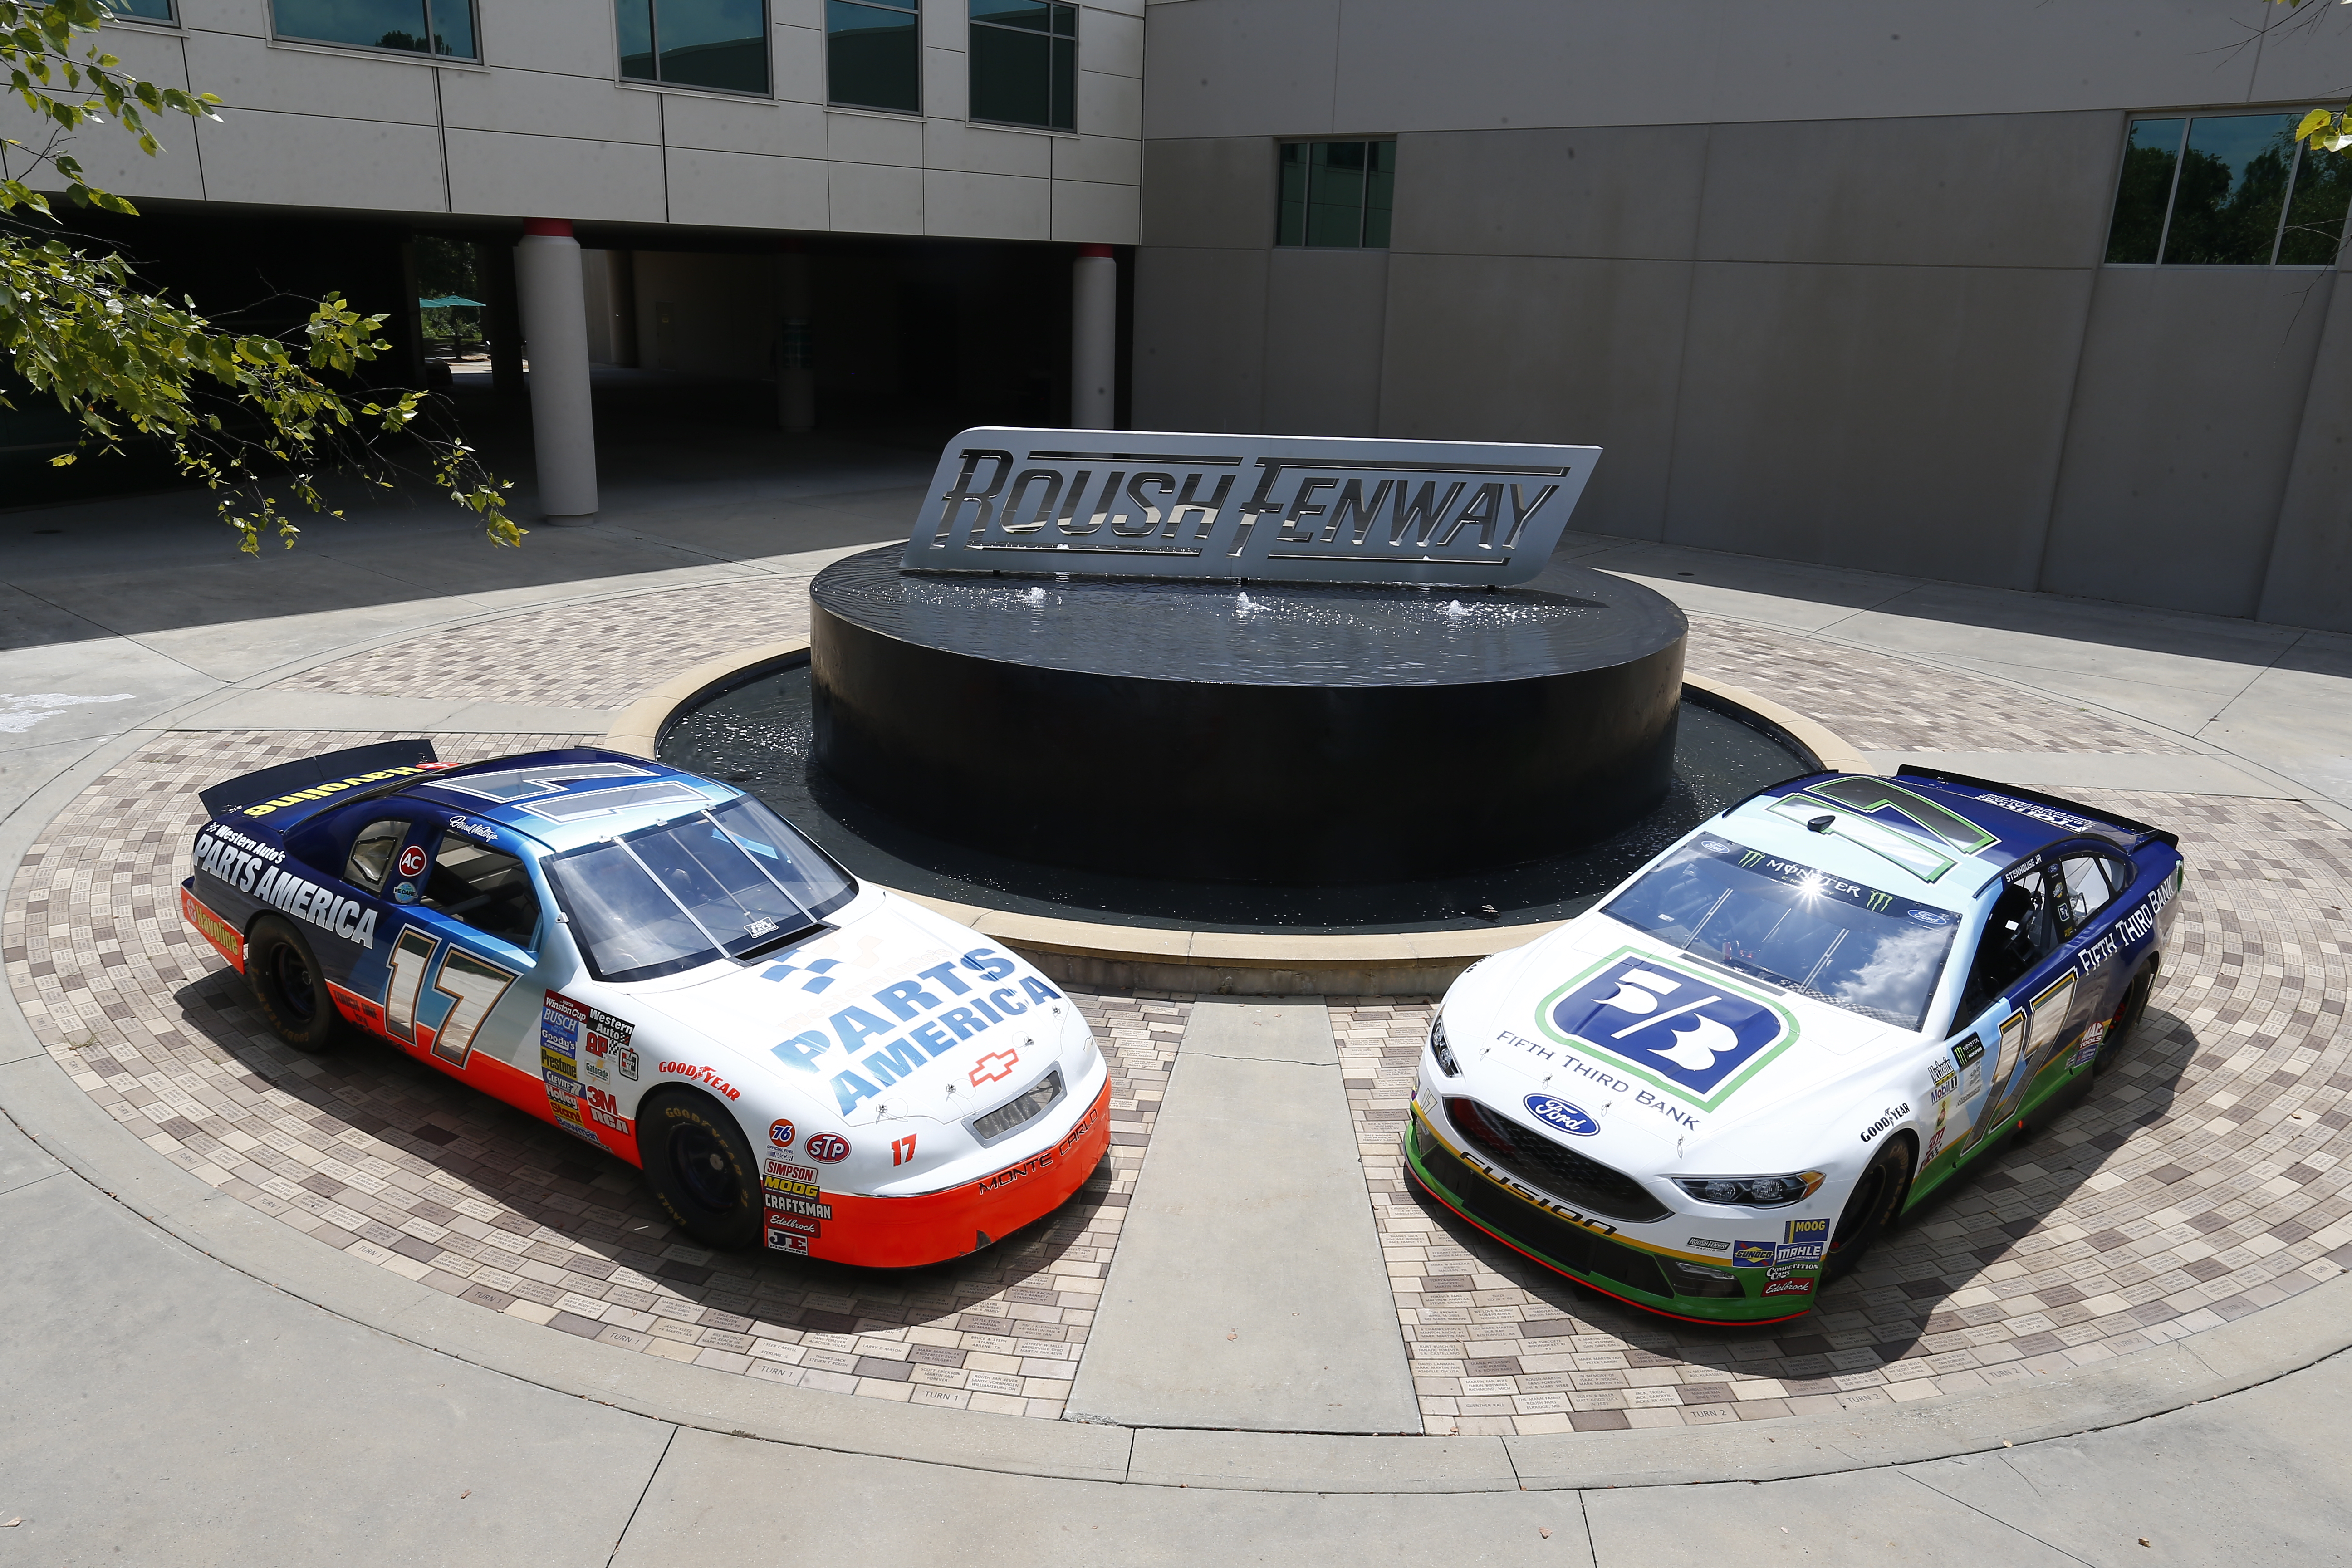 Stenhouse To Honor Waltrip with Darlington Throwback Scheme